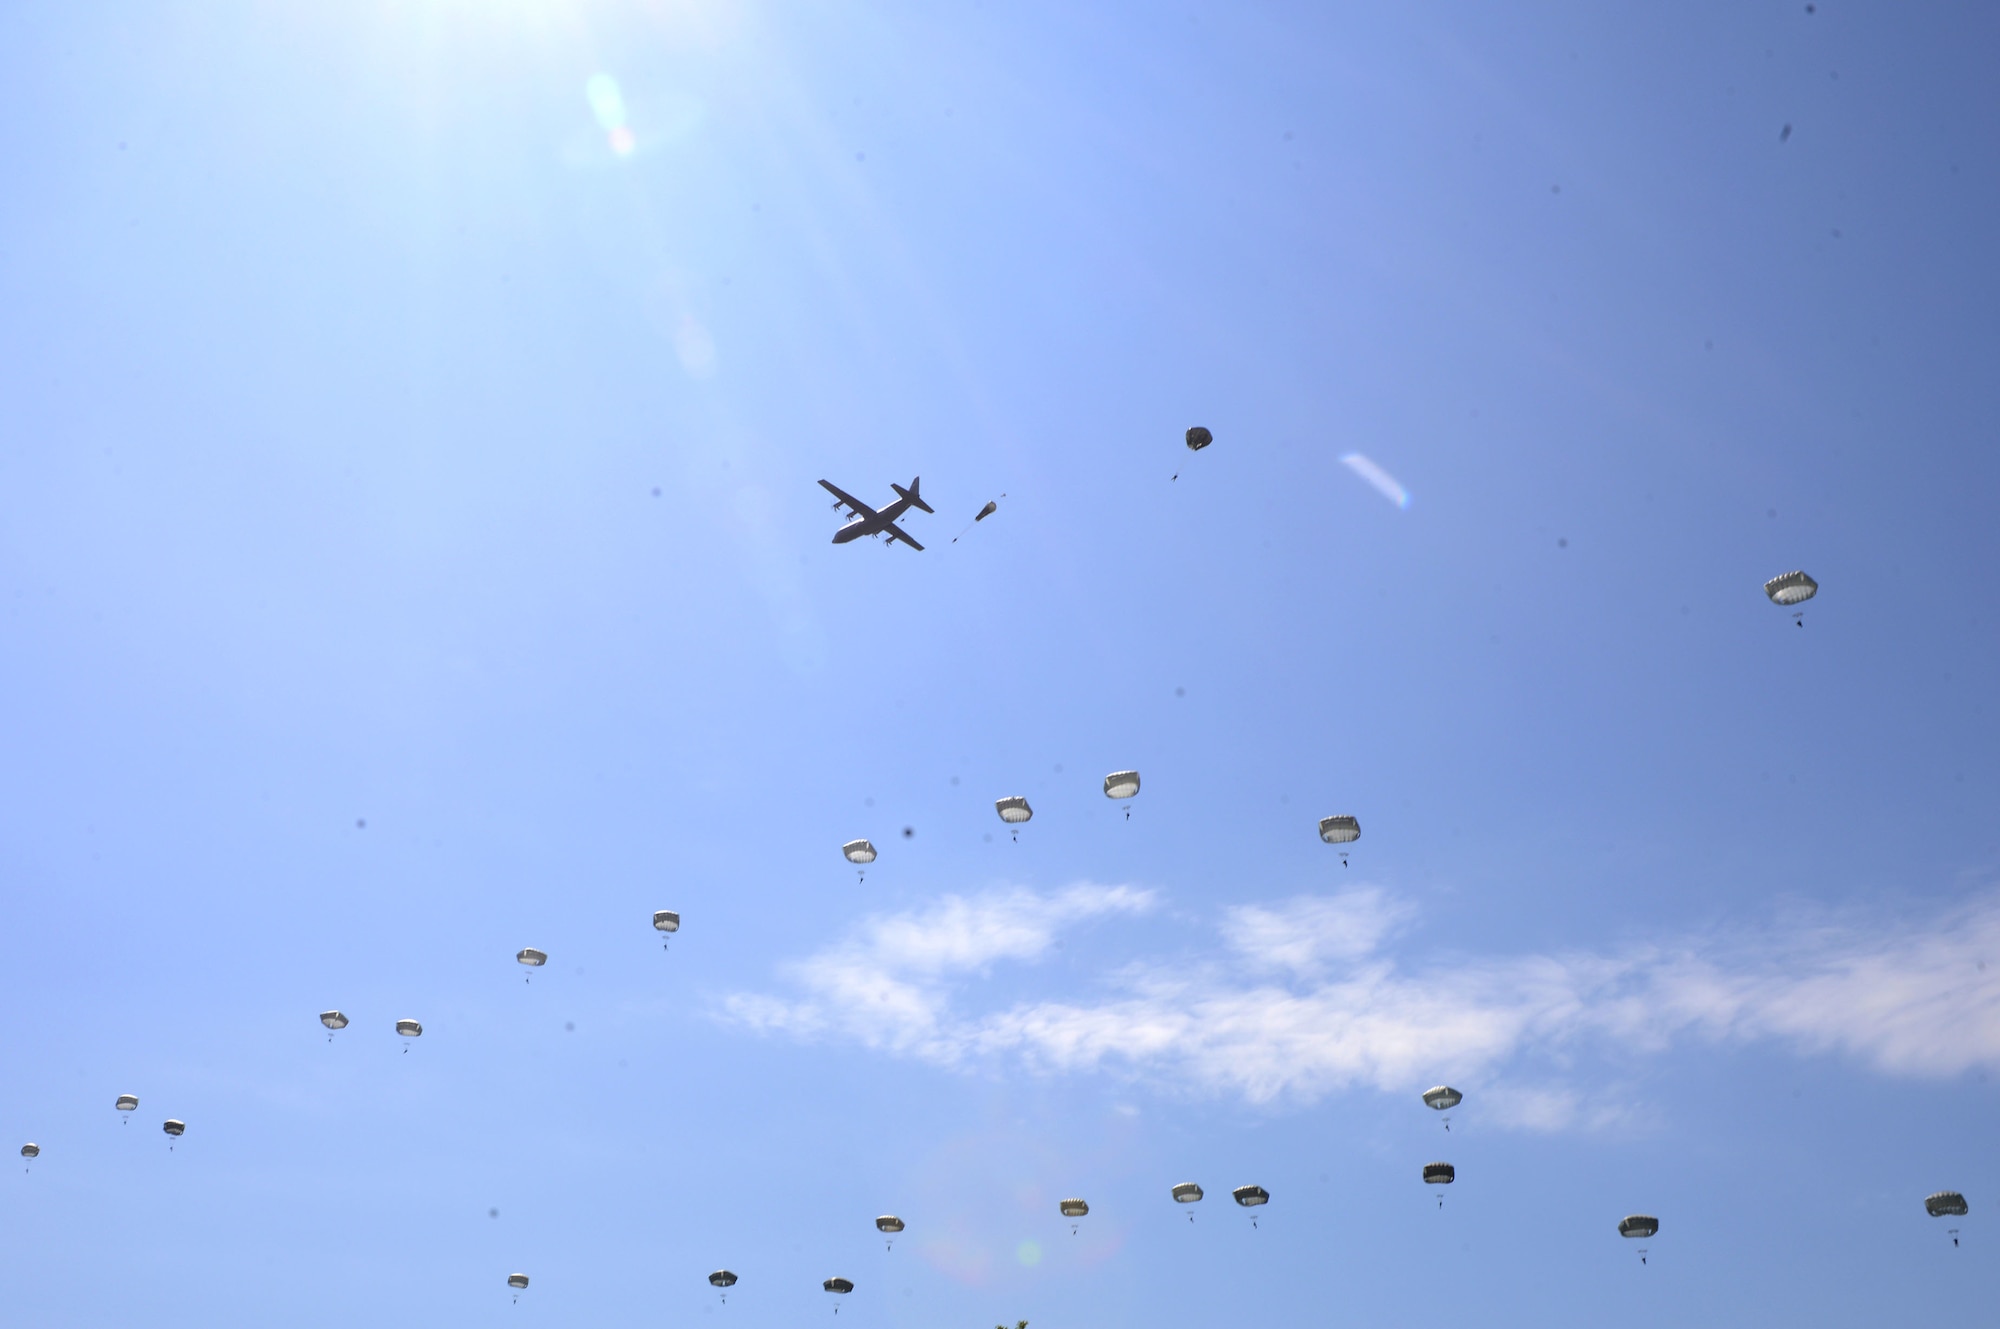 A U.S. Air Force C-130J Super Hercules drops paratroopers over Sainte-Mère-Église, France, June 3, 2018. U.S. and Allied aircraft conducted memorial airdrops to commemorate the Battle of Normandy in World War II. (U.S. Air Force photo by Senior Airman Joshua Magbanua)